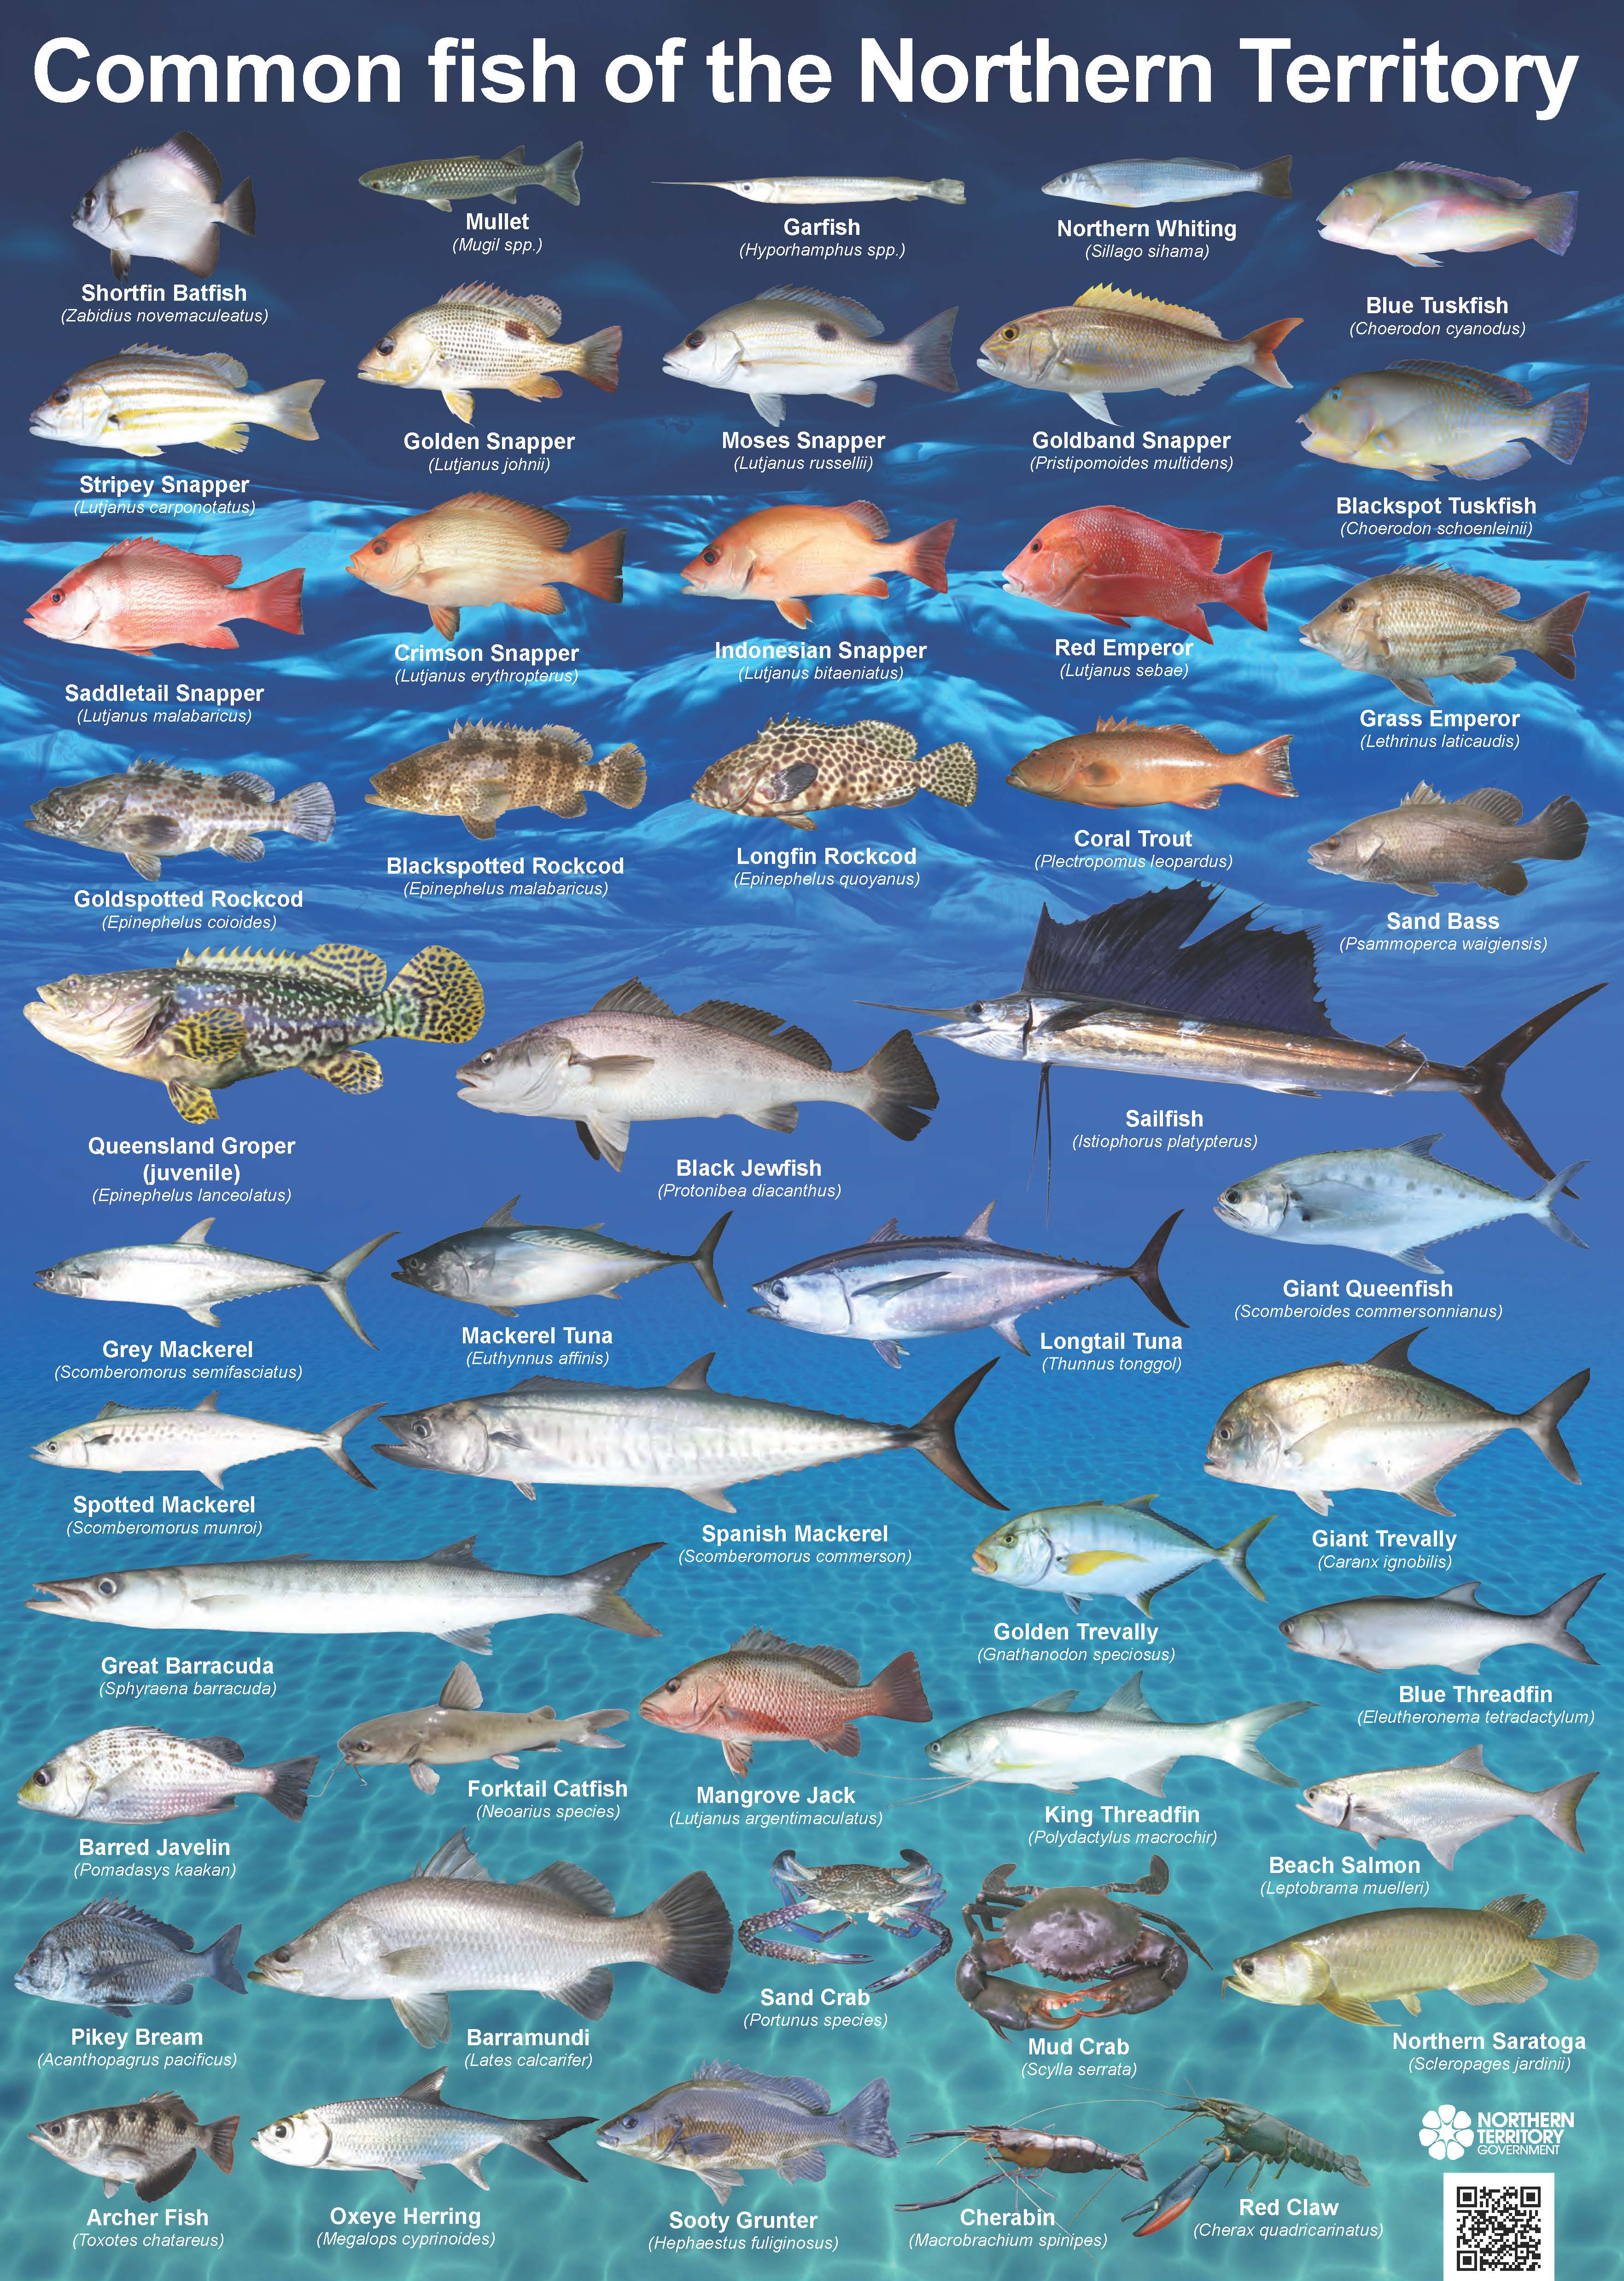 Common fish of the NT